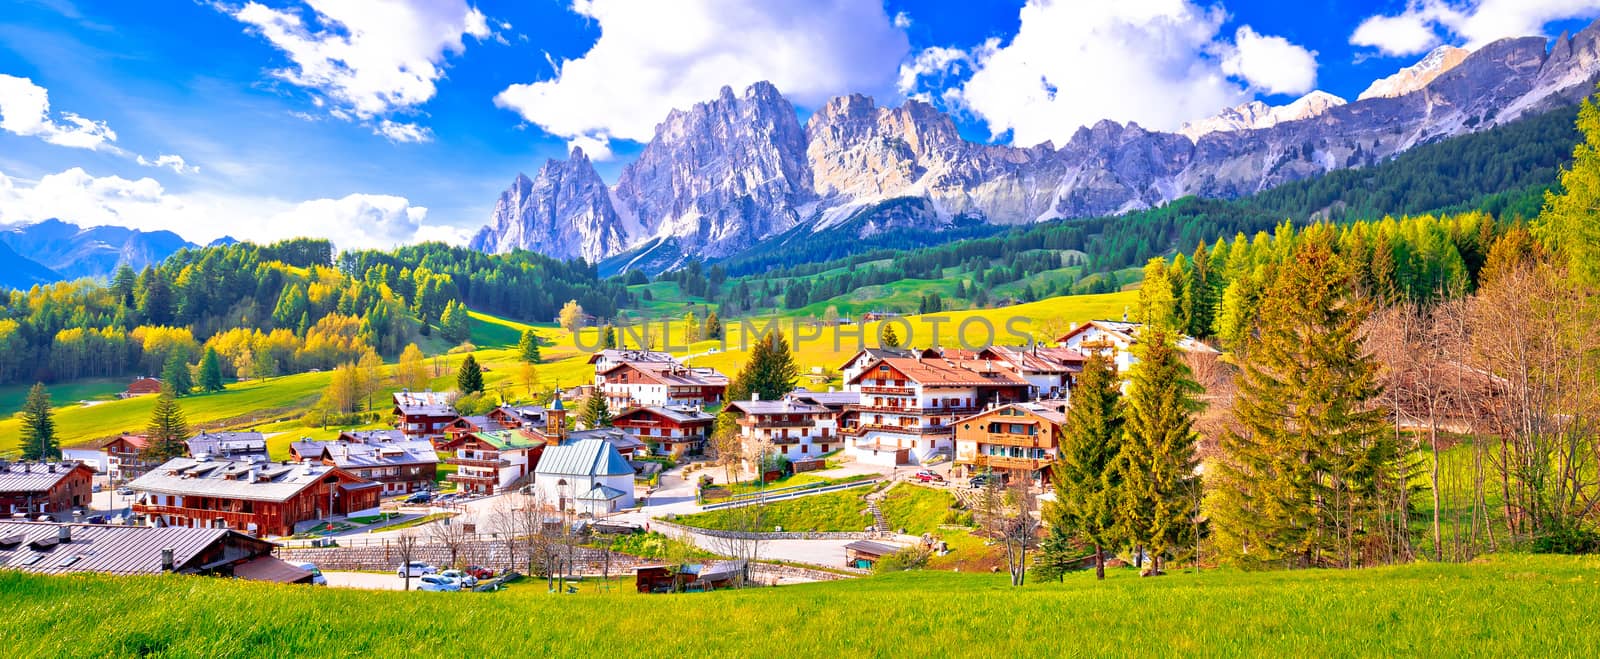 Alps landscape in Cortina D' Ampezzo panoramic view, idyllic mountain peaks of Dolomites, South Tyrol region of Italy